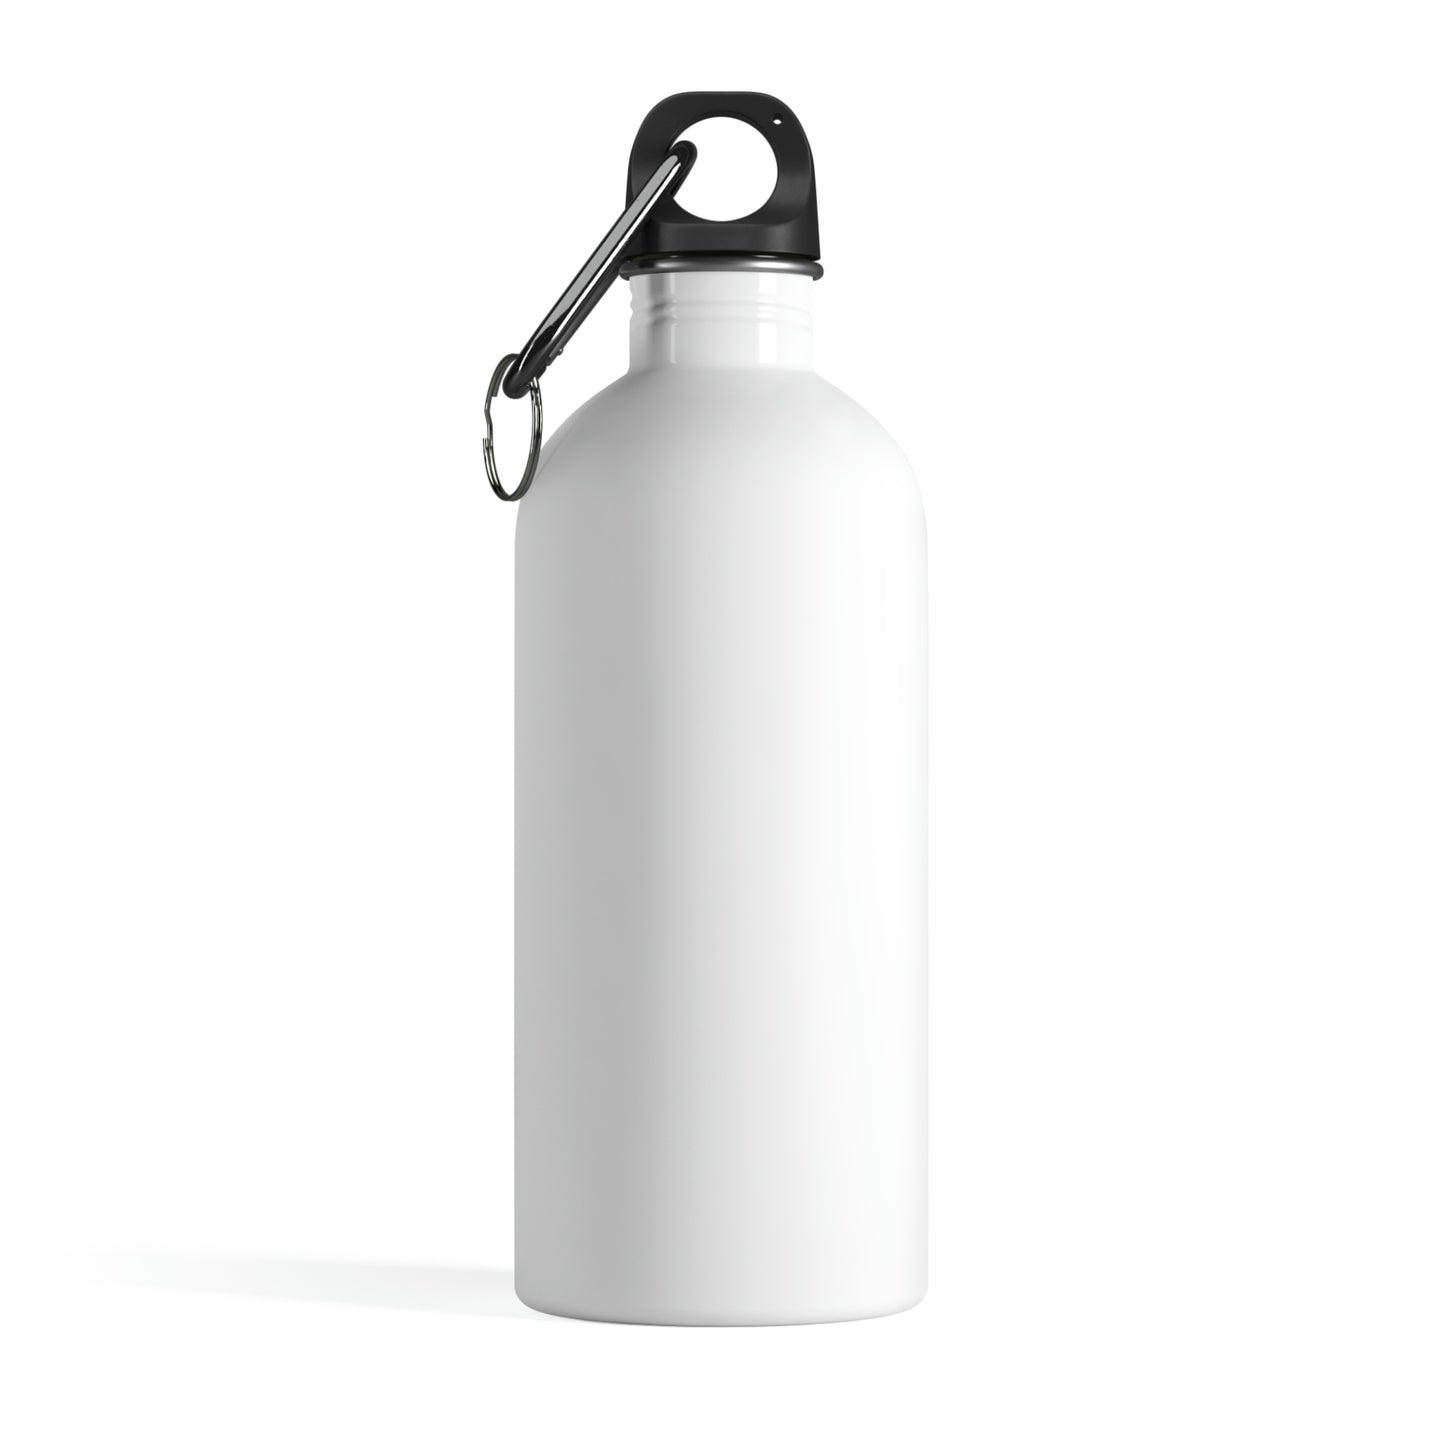 Leave Me Alone - Stainless Steel Water Bottle